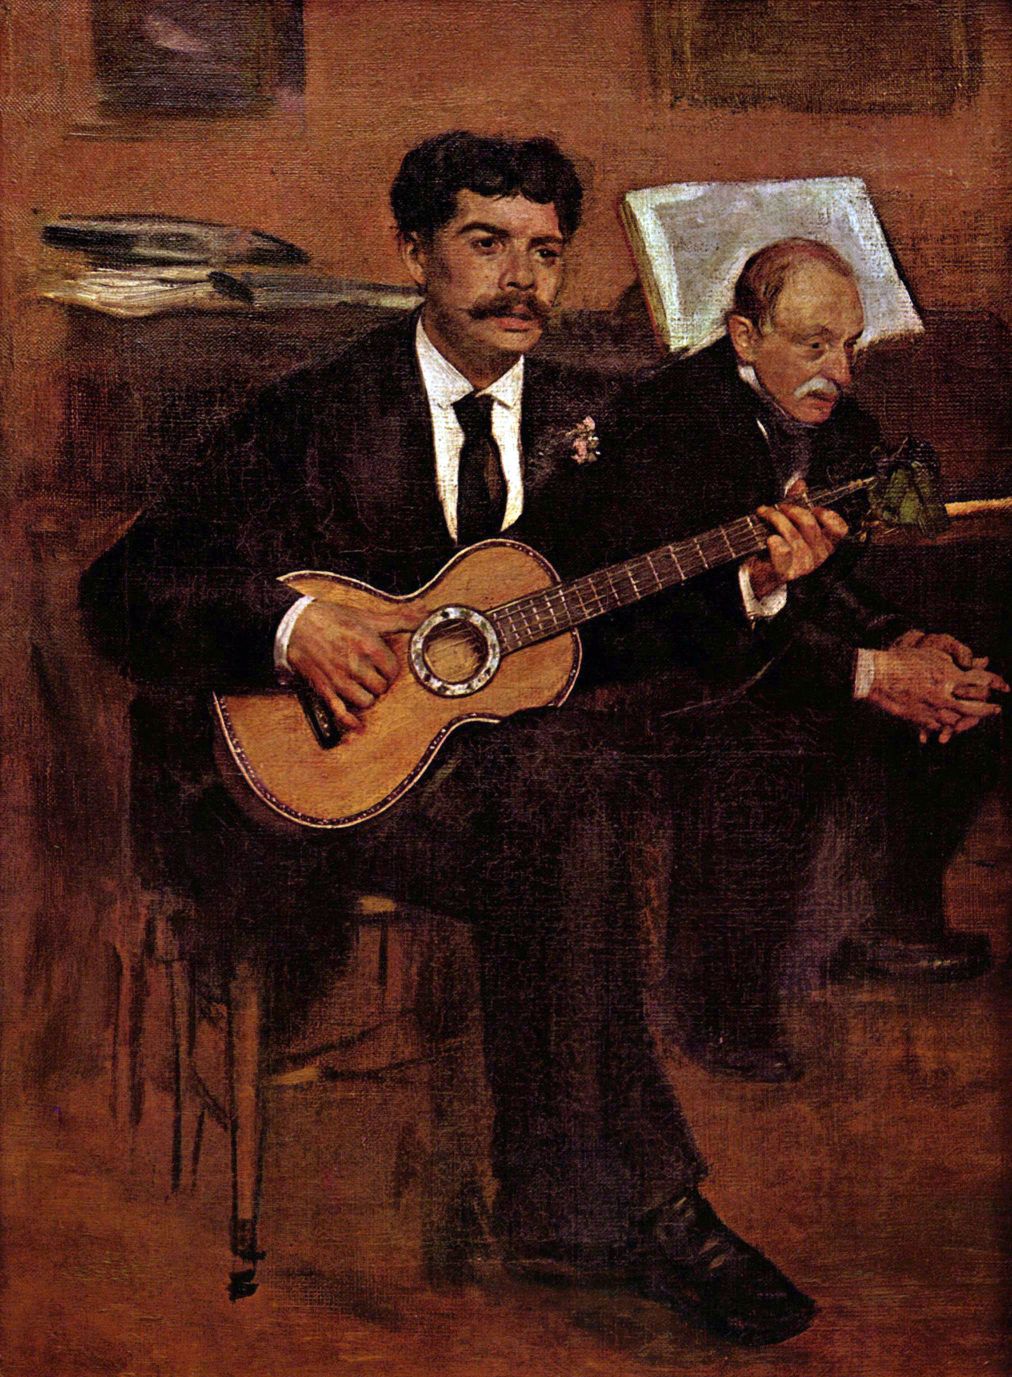 Édouard Manet - The Guitarist Pagans and Monsieur Degas by Manet